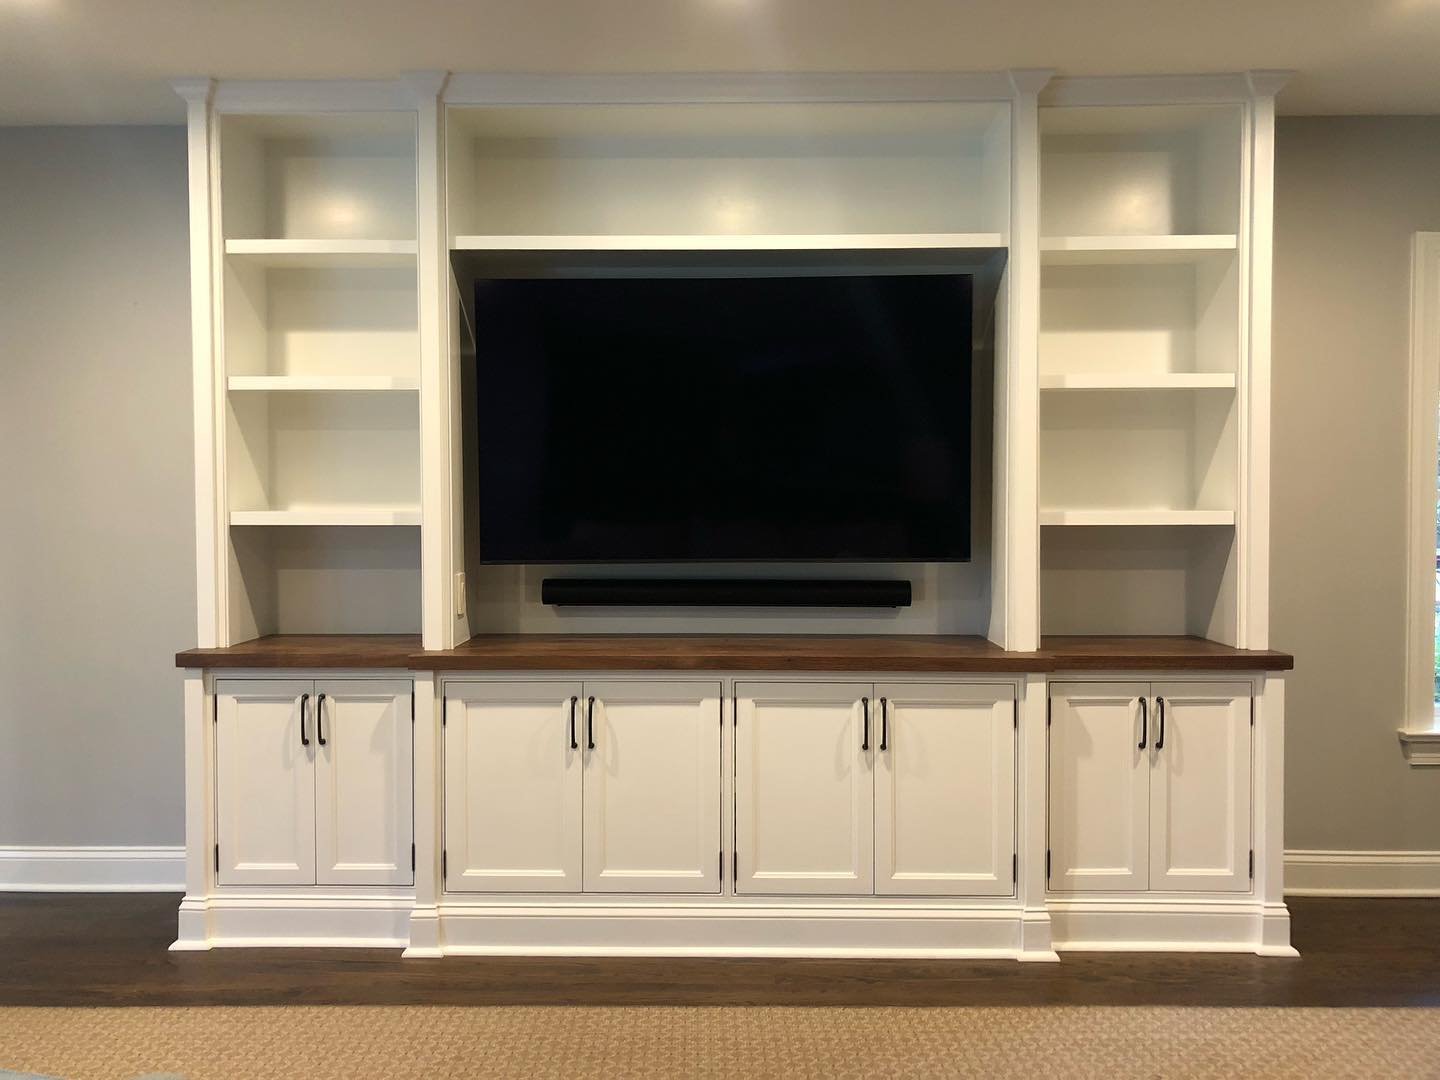  The finished project has inset flat-panel beveled shaker doors, beaded face frames, and a black walnut countertop.  